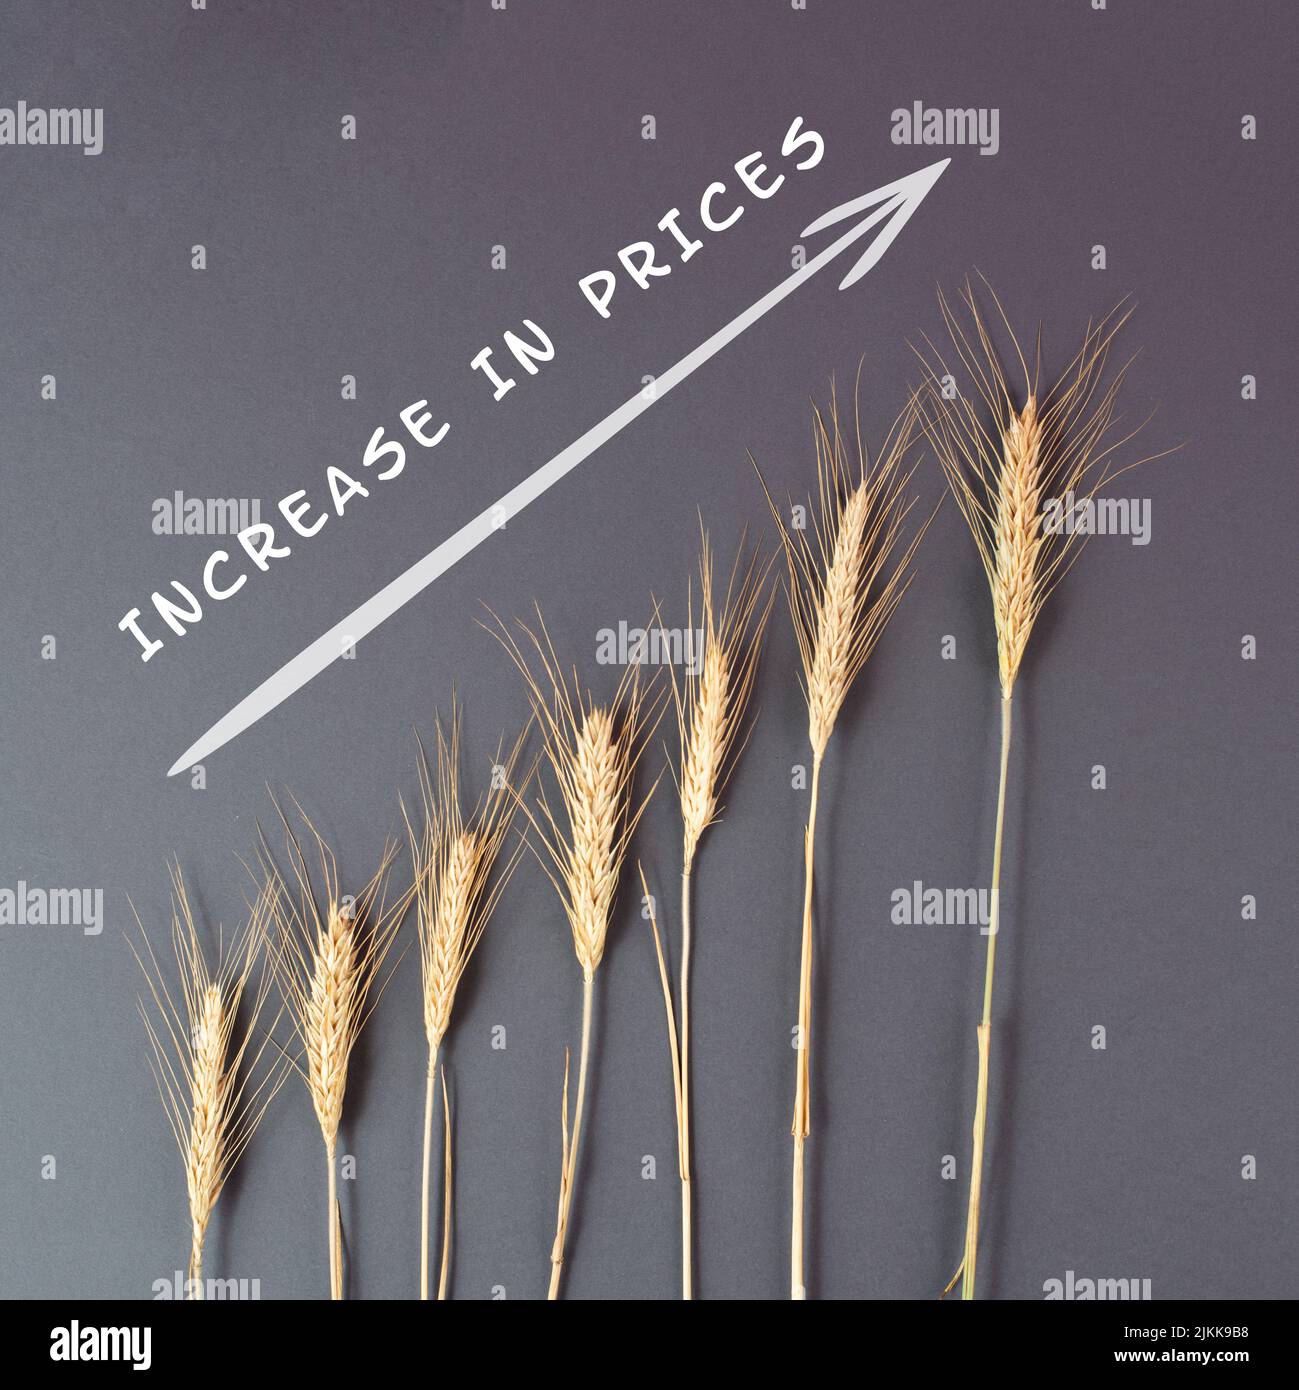 Food crisis with increasing prices and shortages, wheat ears on a brown background, supply chain problems, inflation causes high living costs Stock Photo